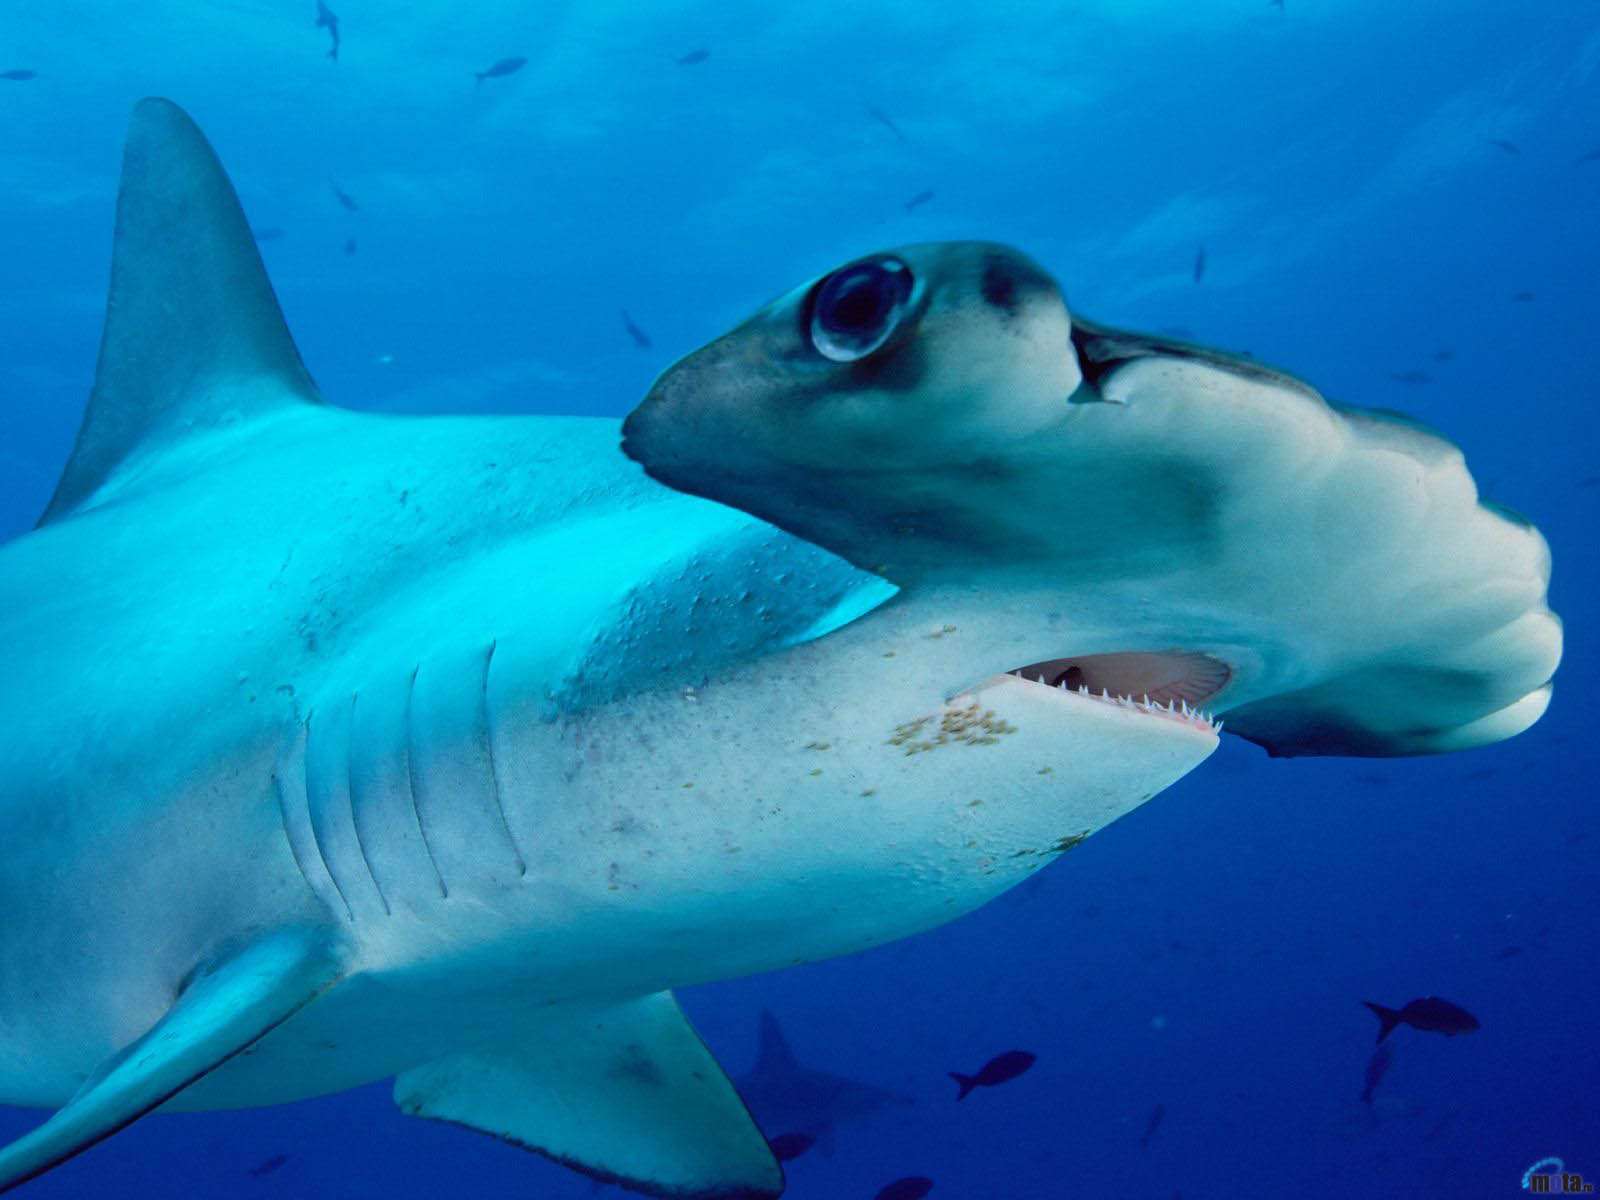 a close up of a shark face near some fish